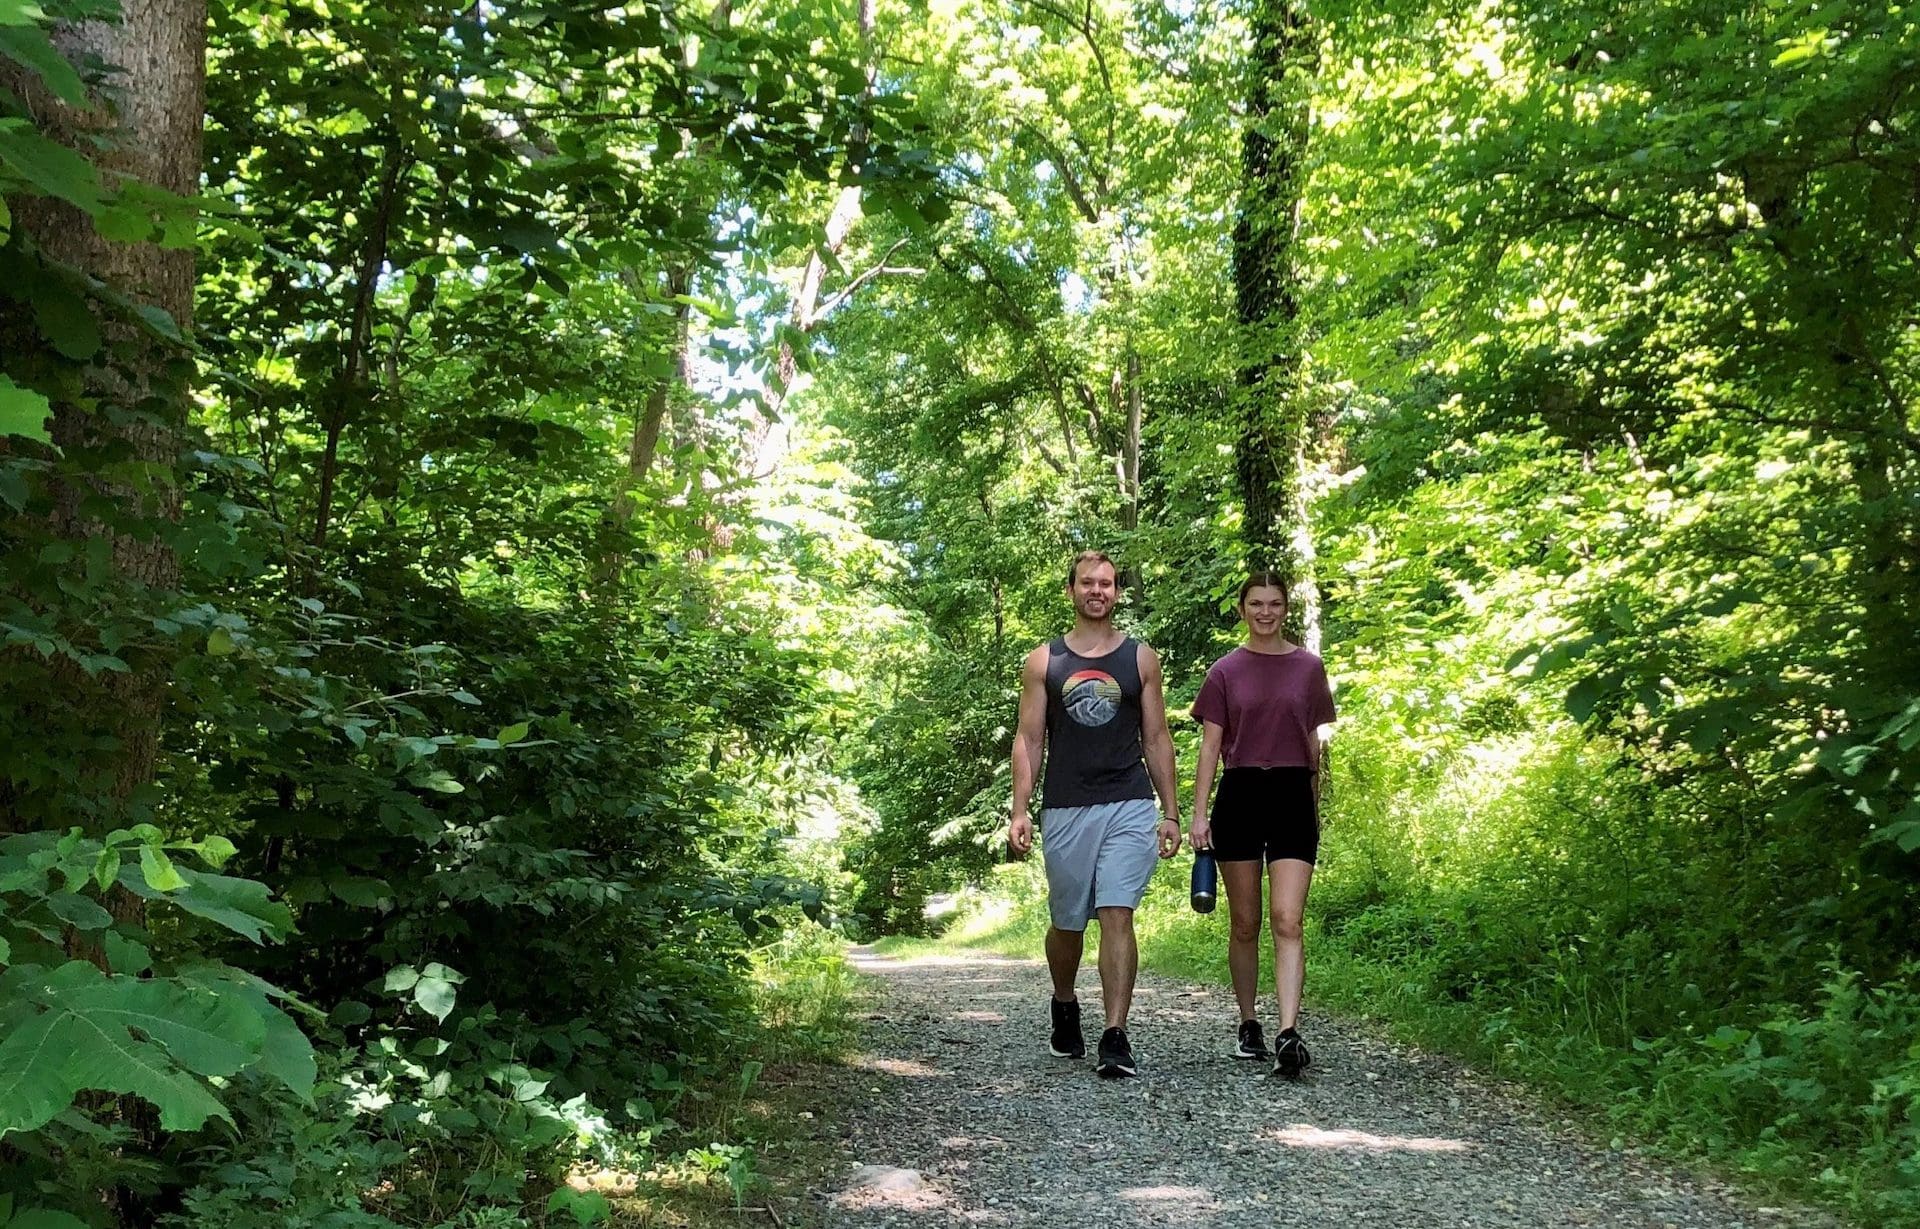 Featured image for “Del. ranks 8th among states for outdoor exercise”